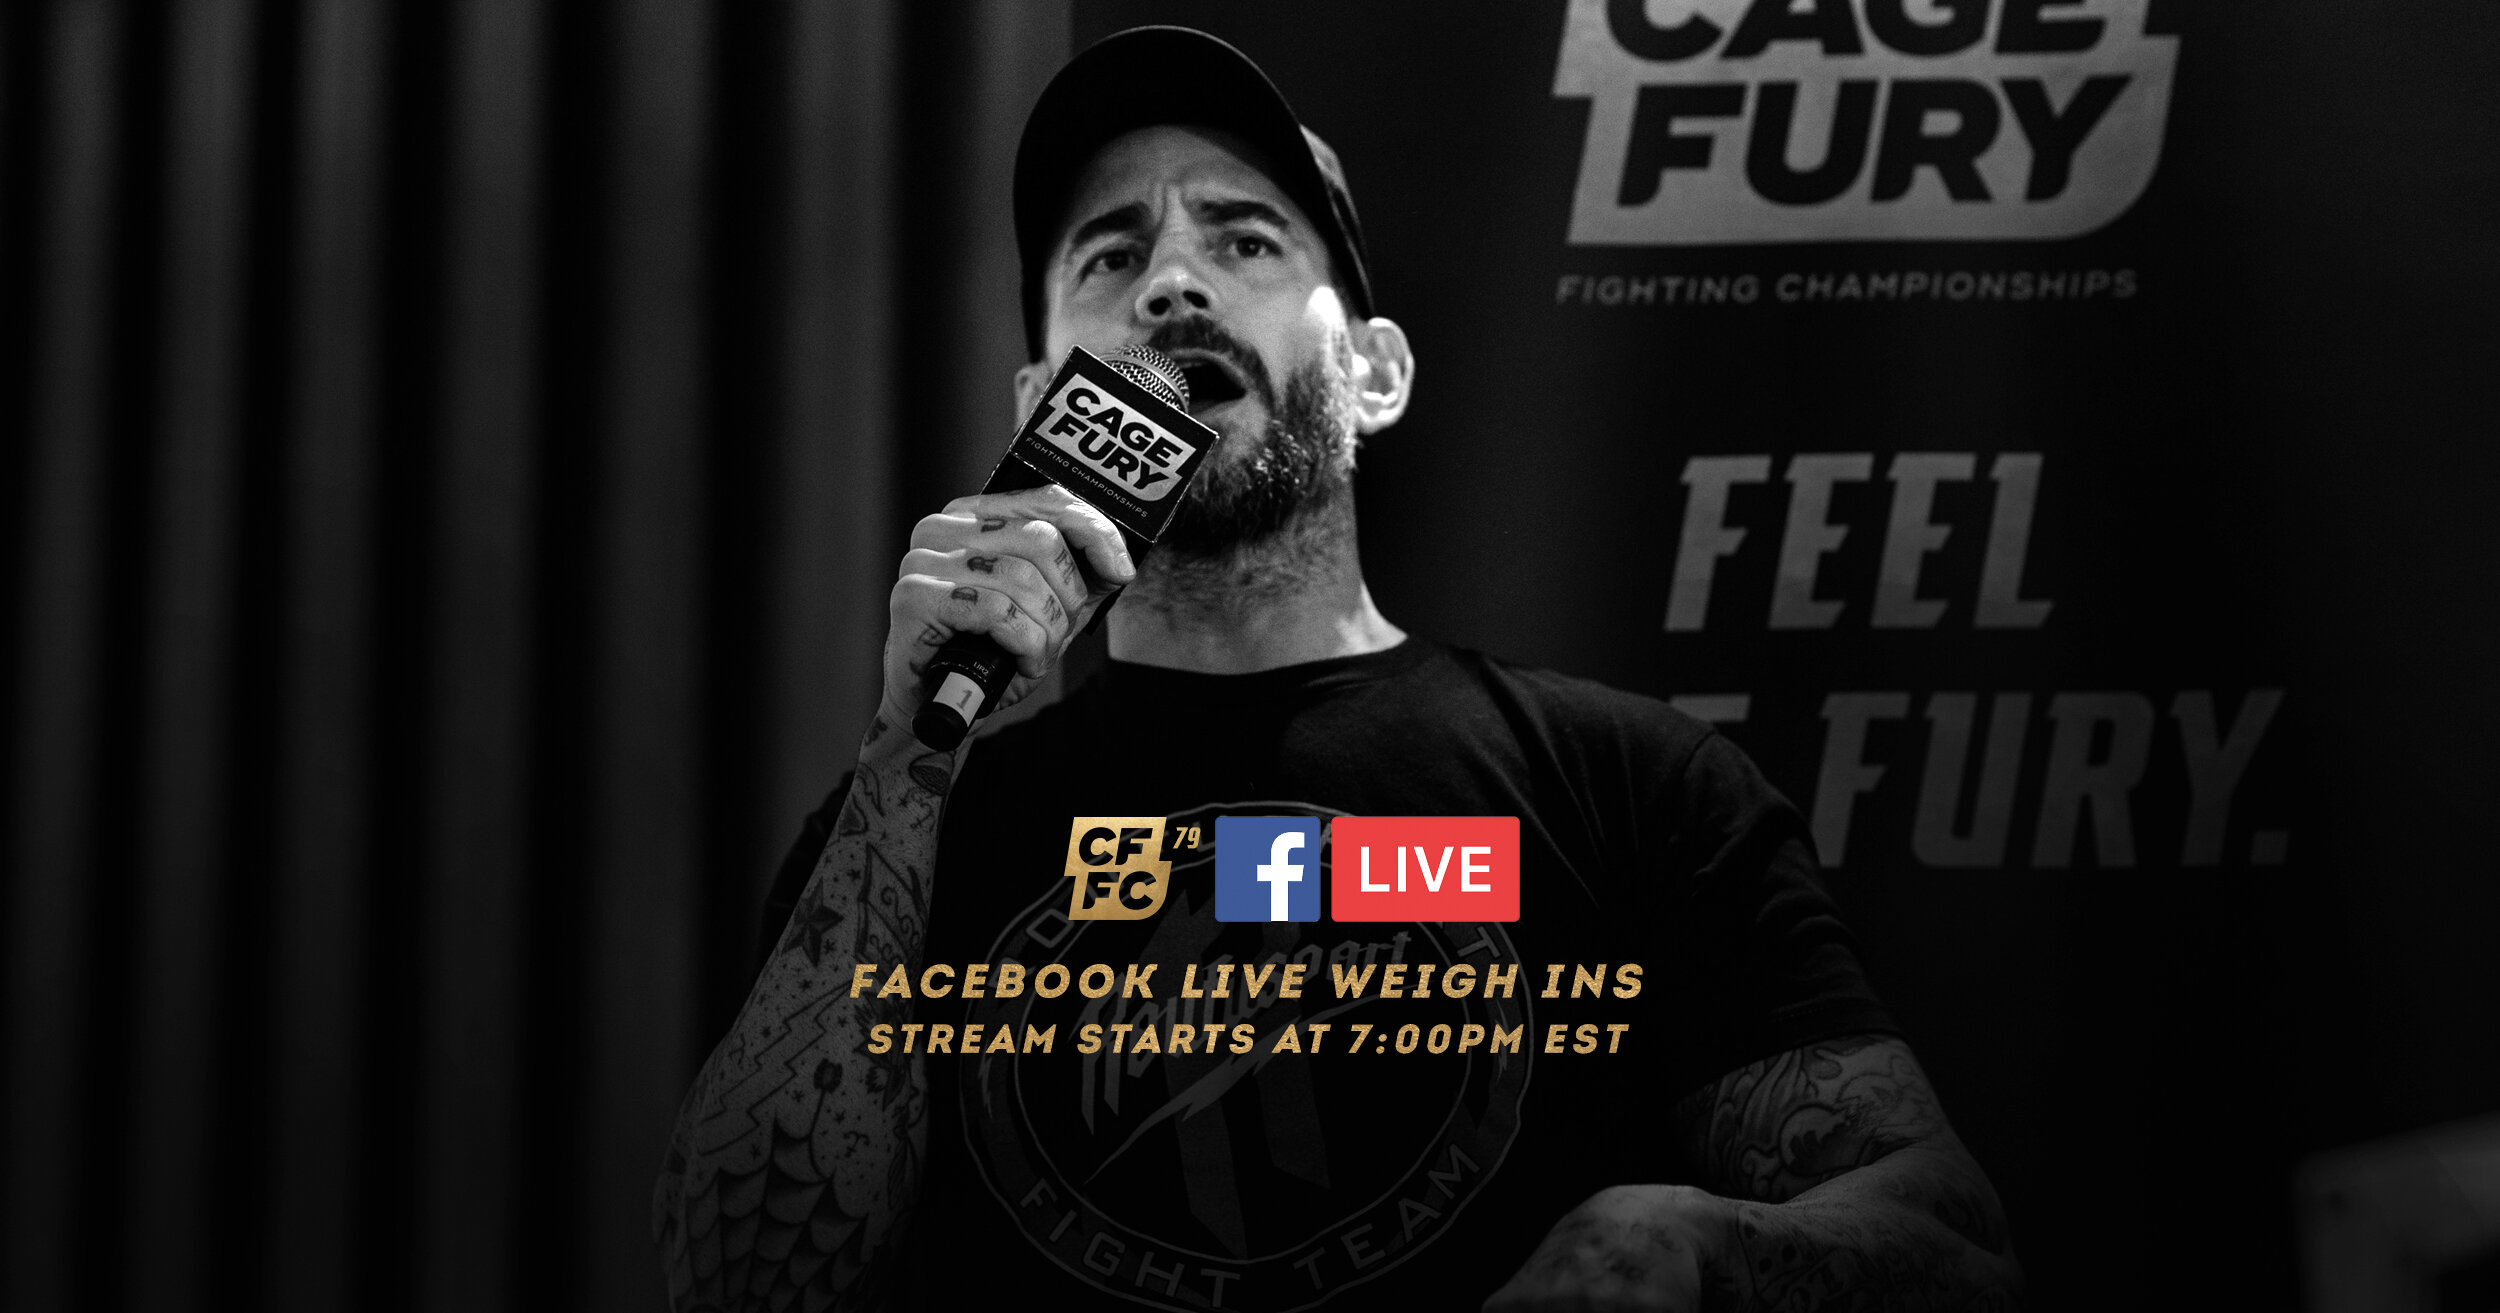 weigh ins — News — Cage Fury Fighting Championships